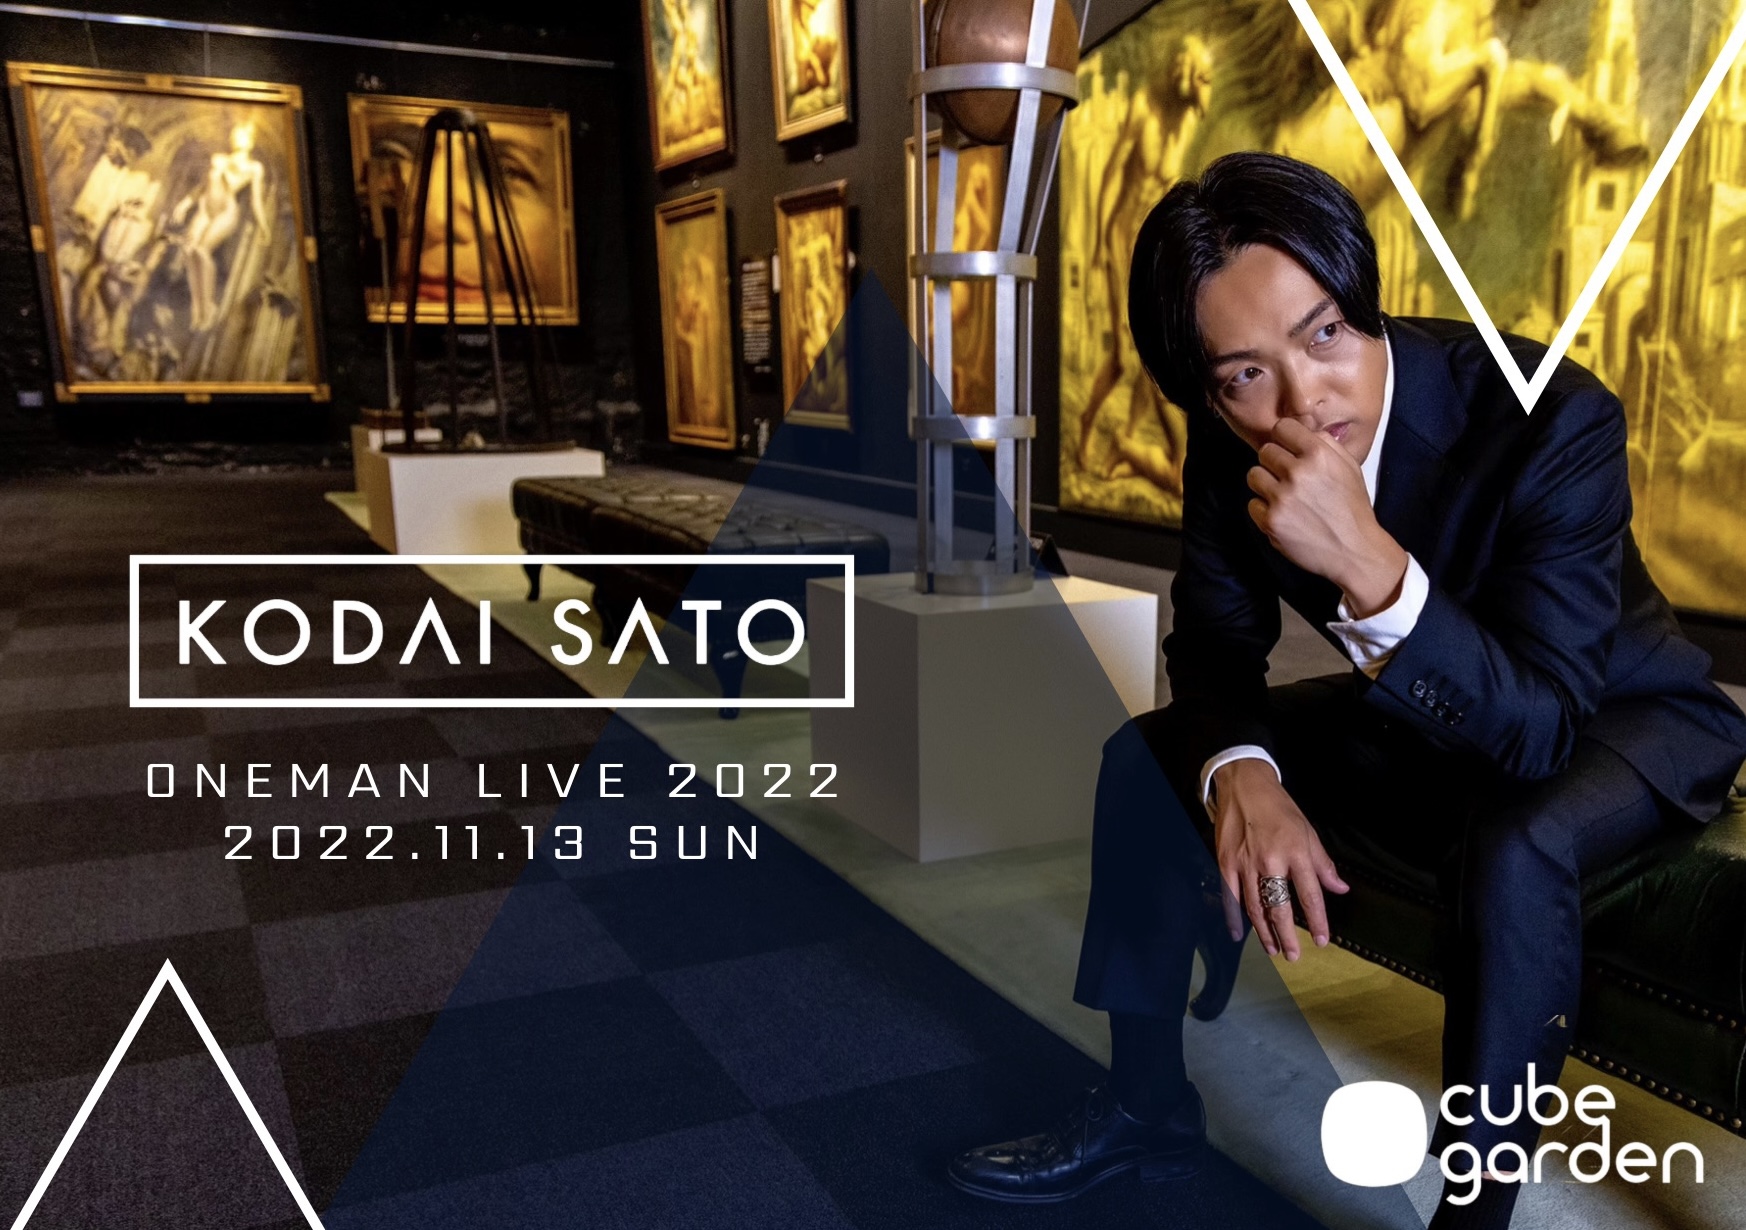 KODAI SATO ONE MAN LIVE 2022 supported by Tomorrow Feat 開催決定！！